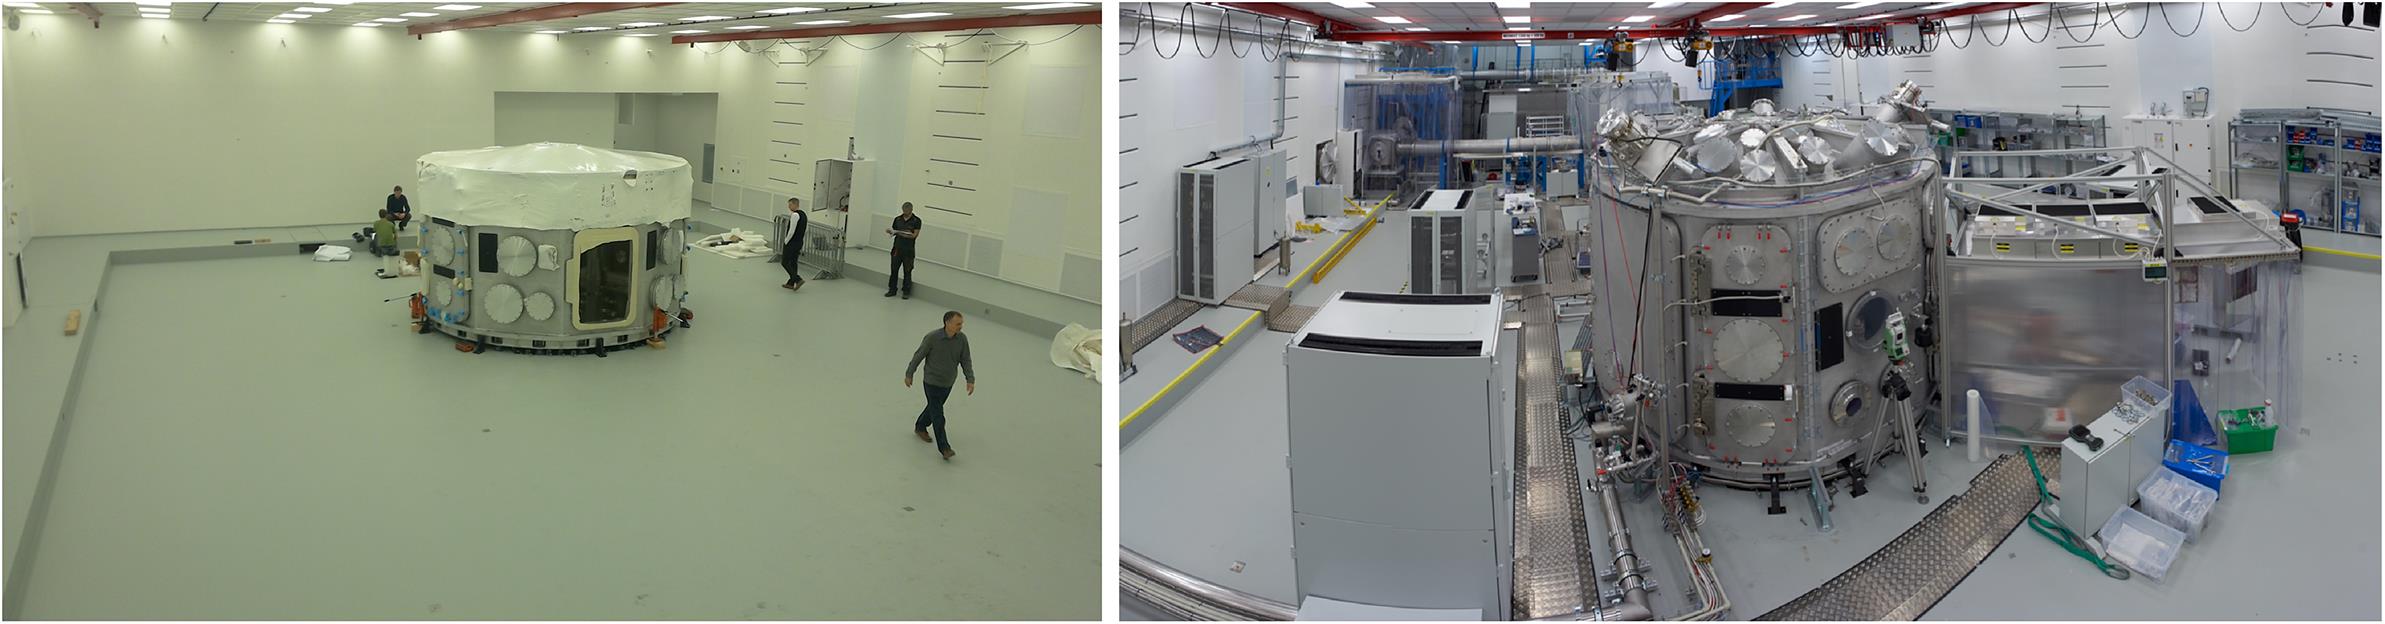 Left: The state of the experimental hall E3 in January 2018. Note that the P3 chamber is not yet fully assembled. Right: The same location in November 2019 with a fully functional BT system and experimental chamber.